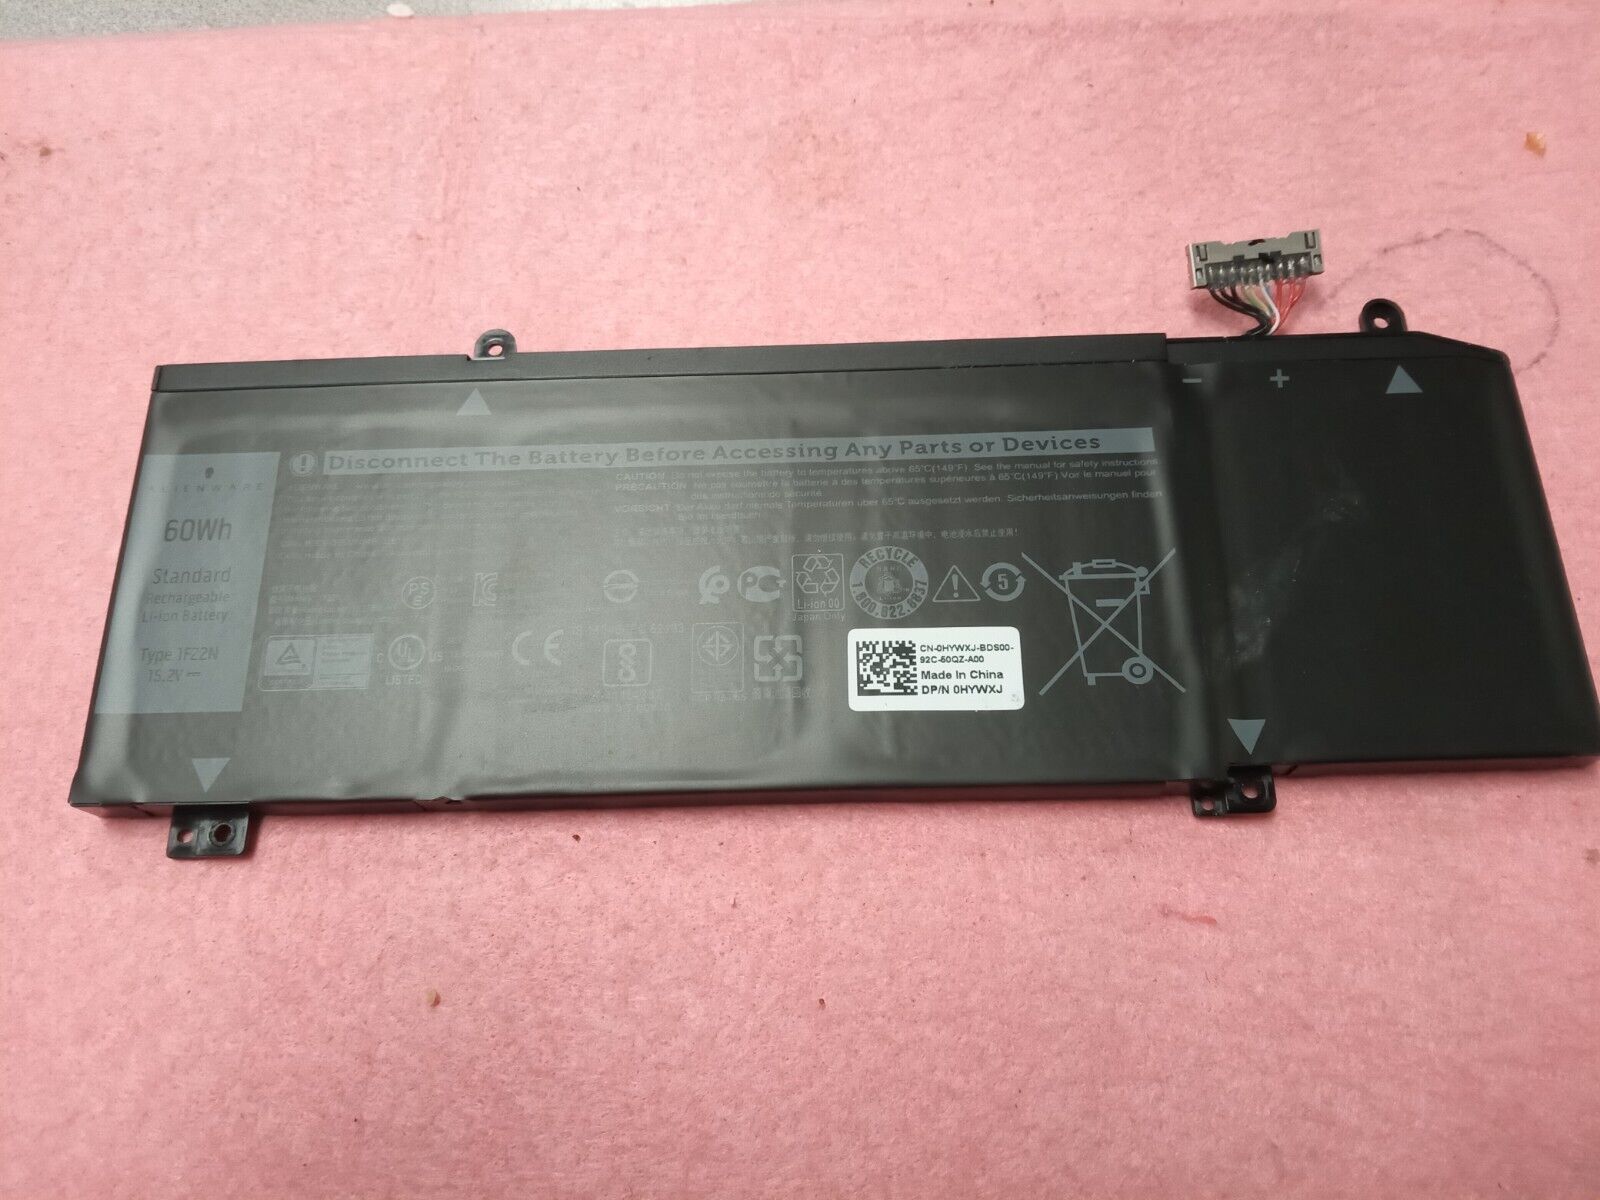  Genuine Alienware M15 M17 60Wh Laptop Battery 4 Cell Dell 1F22N